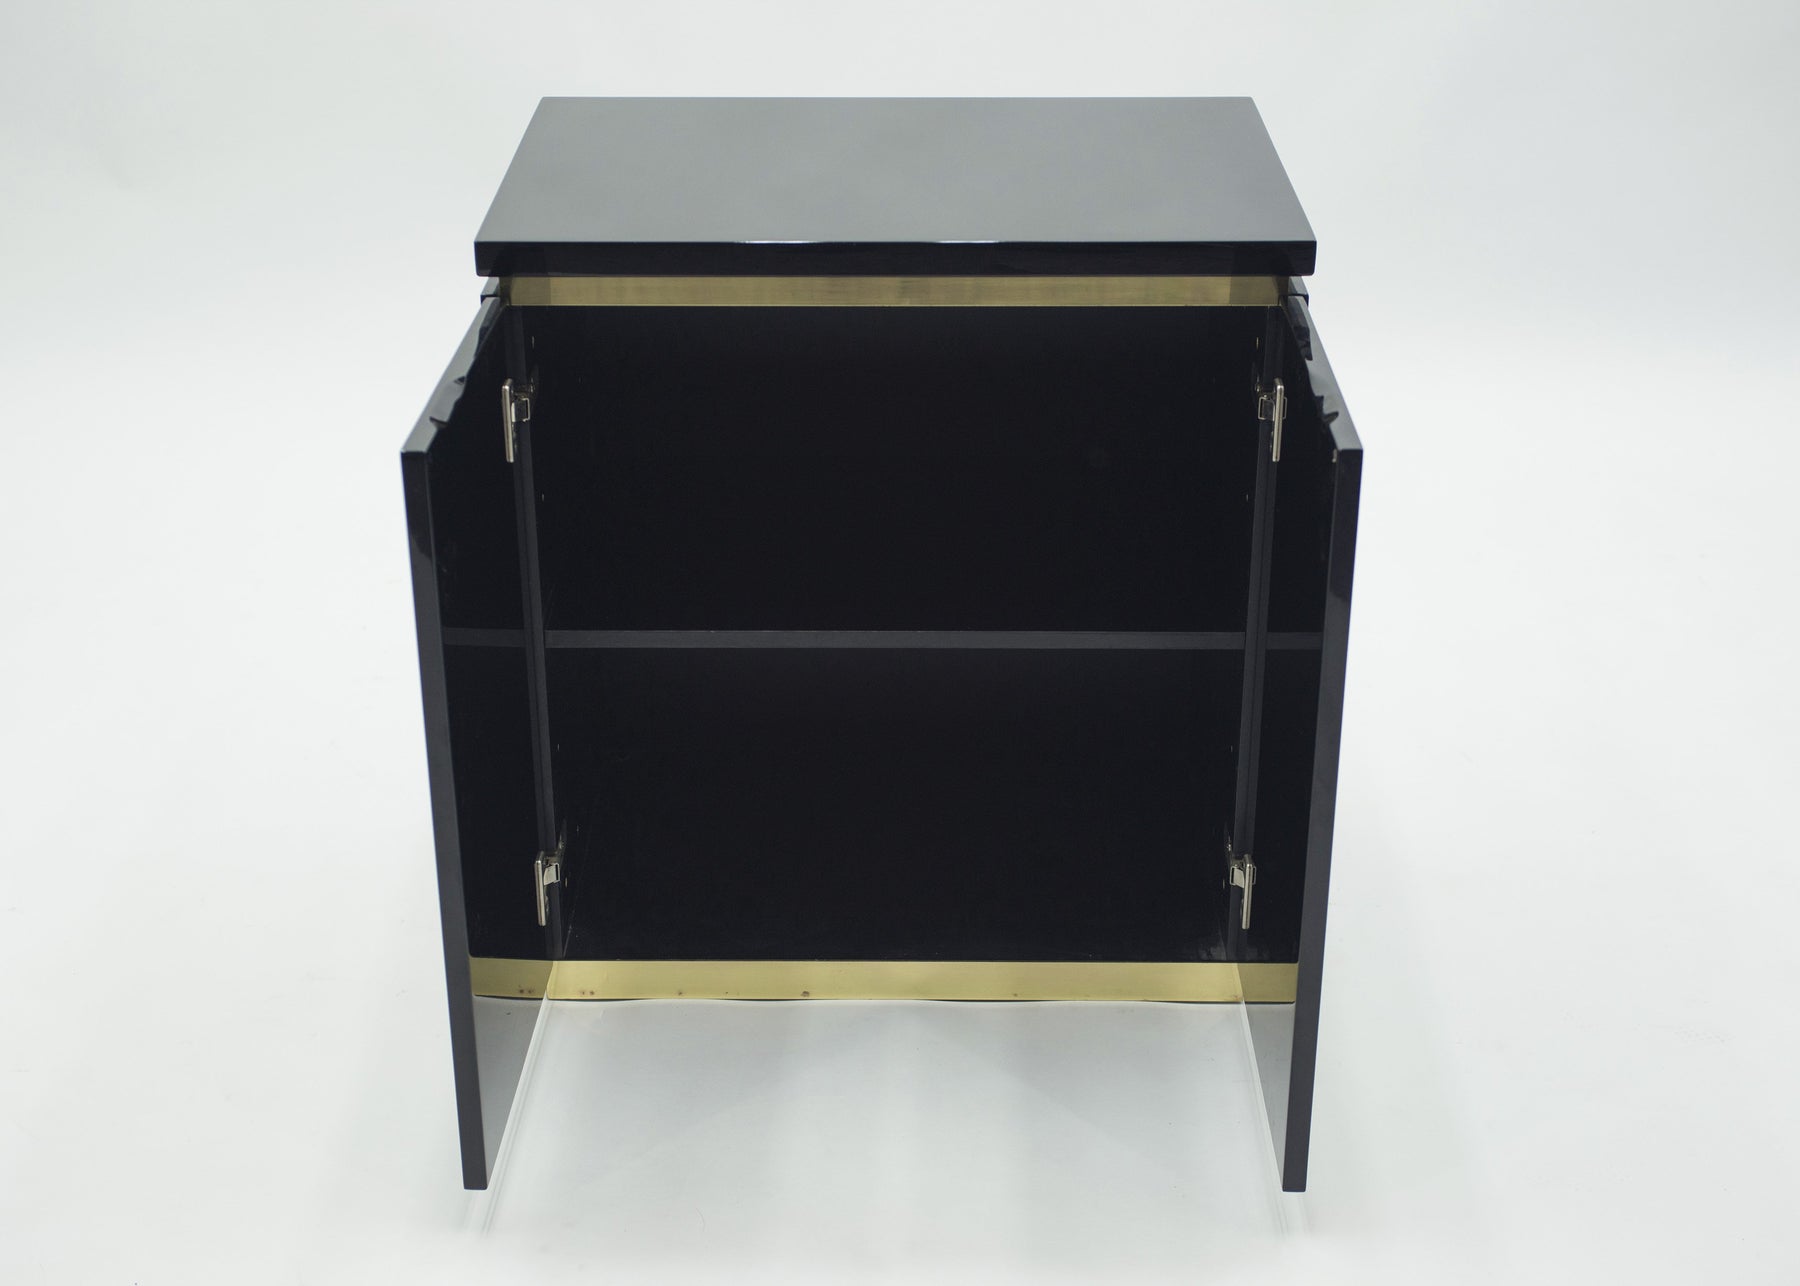 Pair of small black lacquer cabinets night stands by J.C. Mahey 1970s